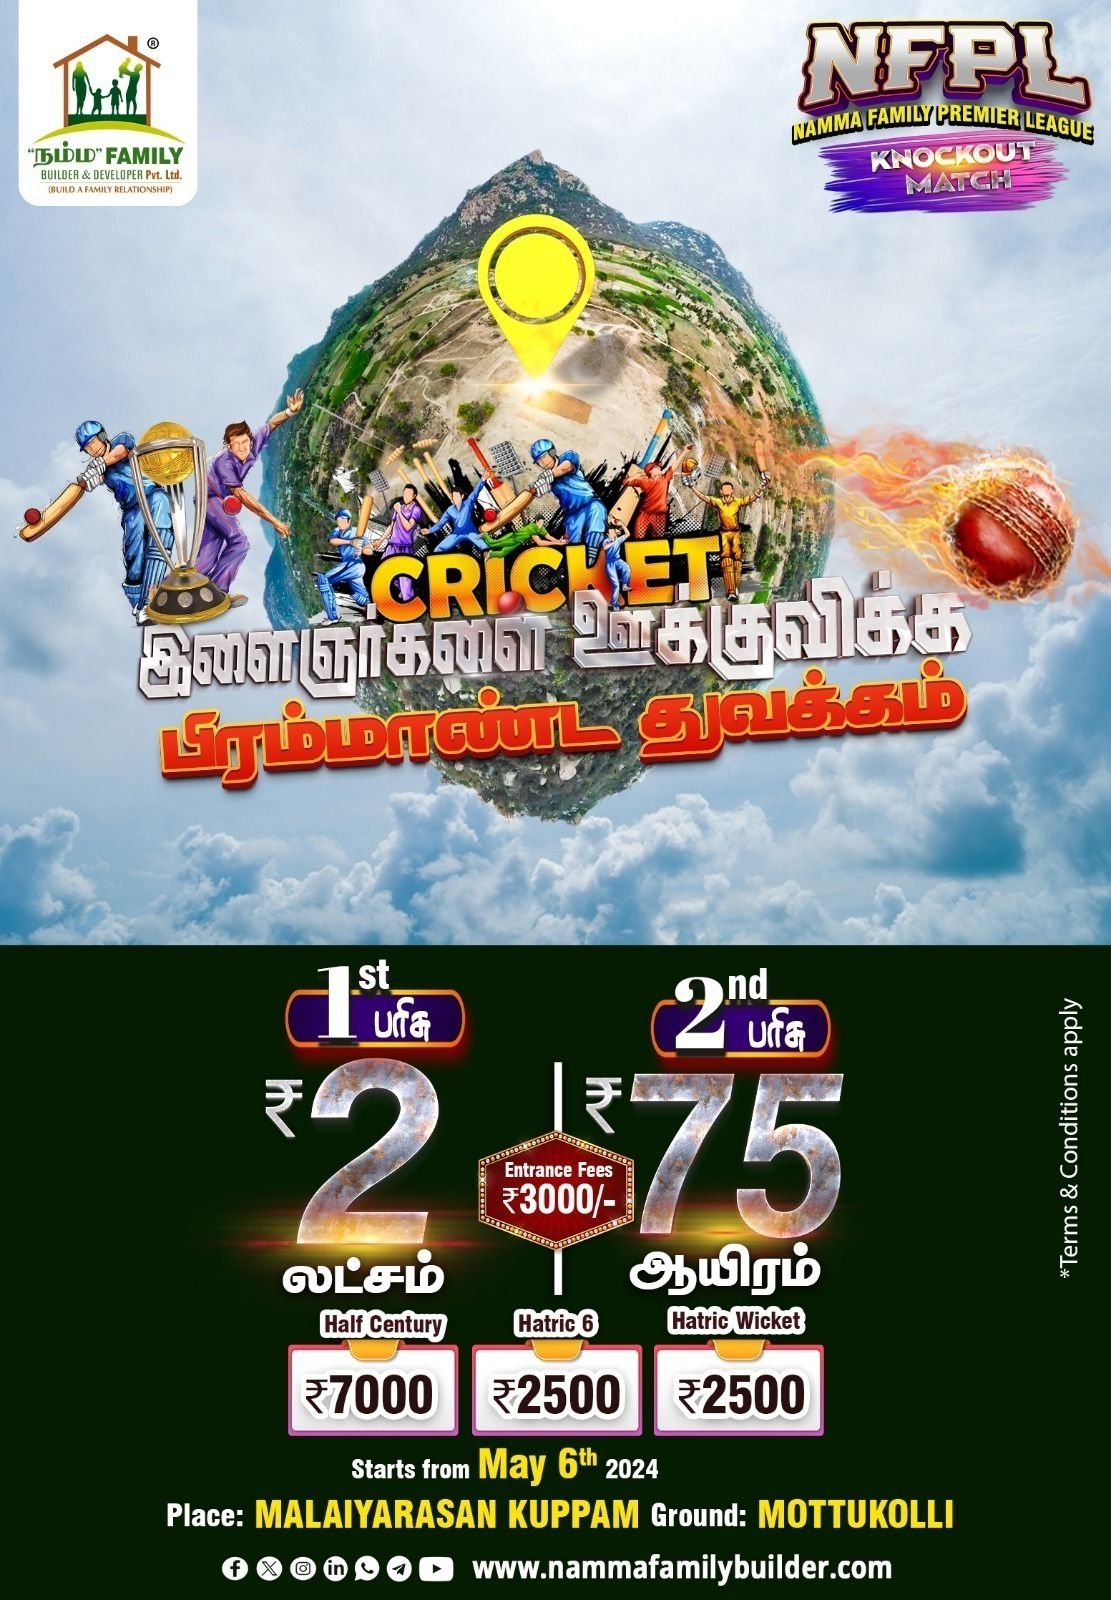 My Dear Cricket\ud83c\udfcfLover's Use This Opportunity NFPL at Malayarasan Kuppam